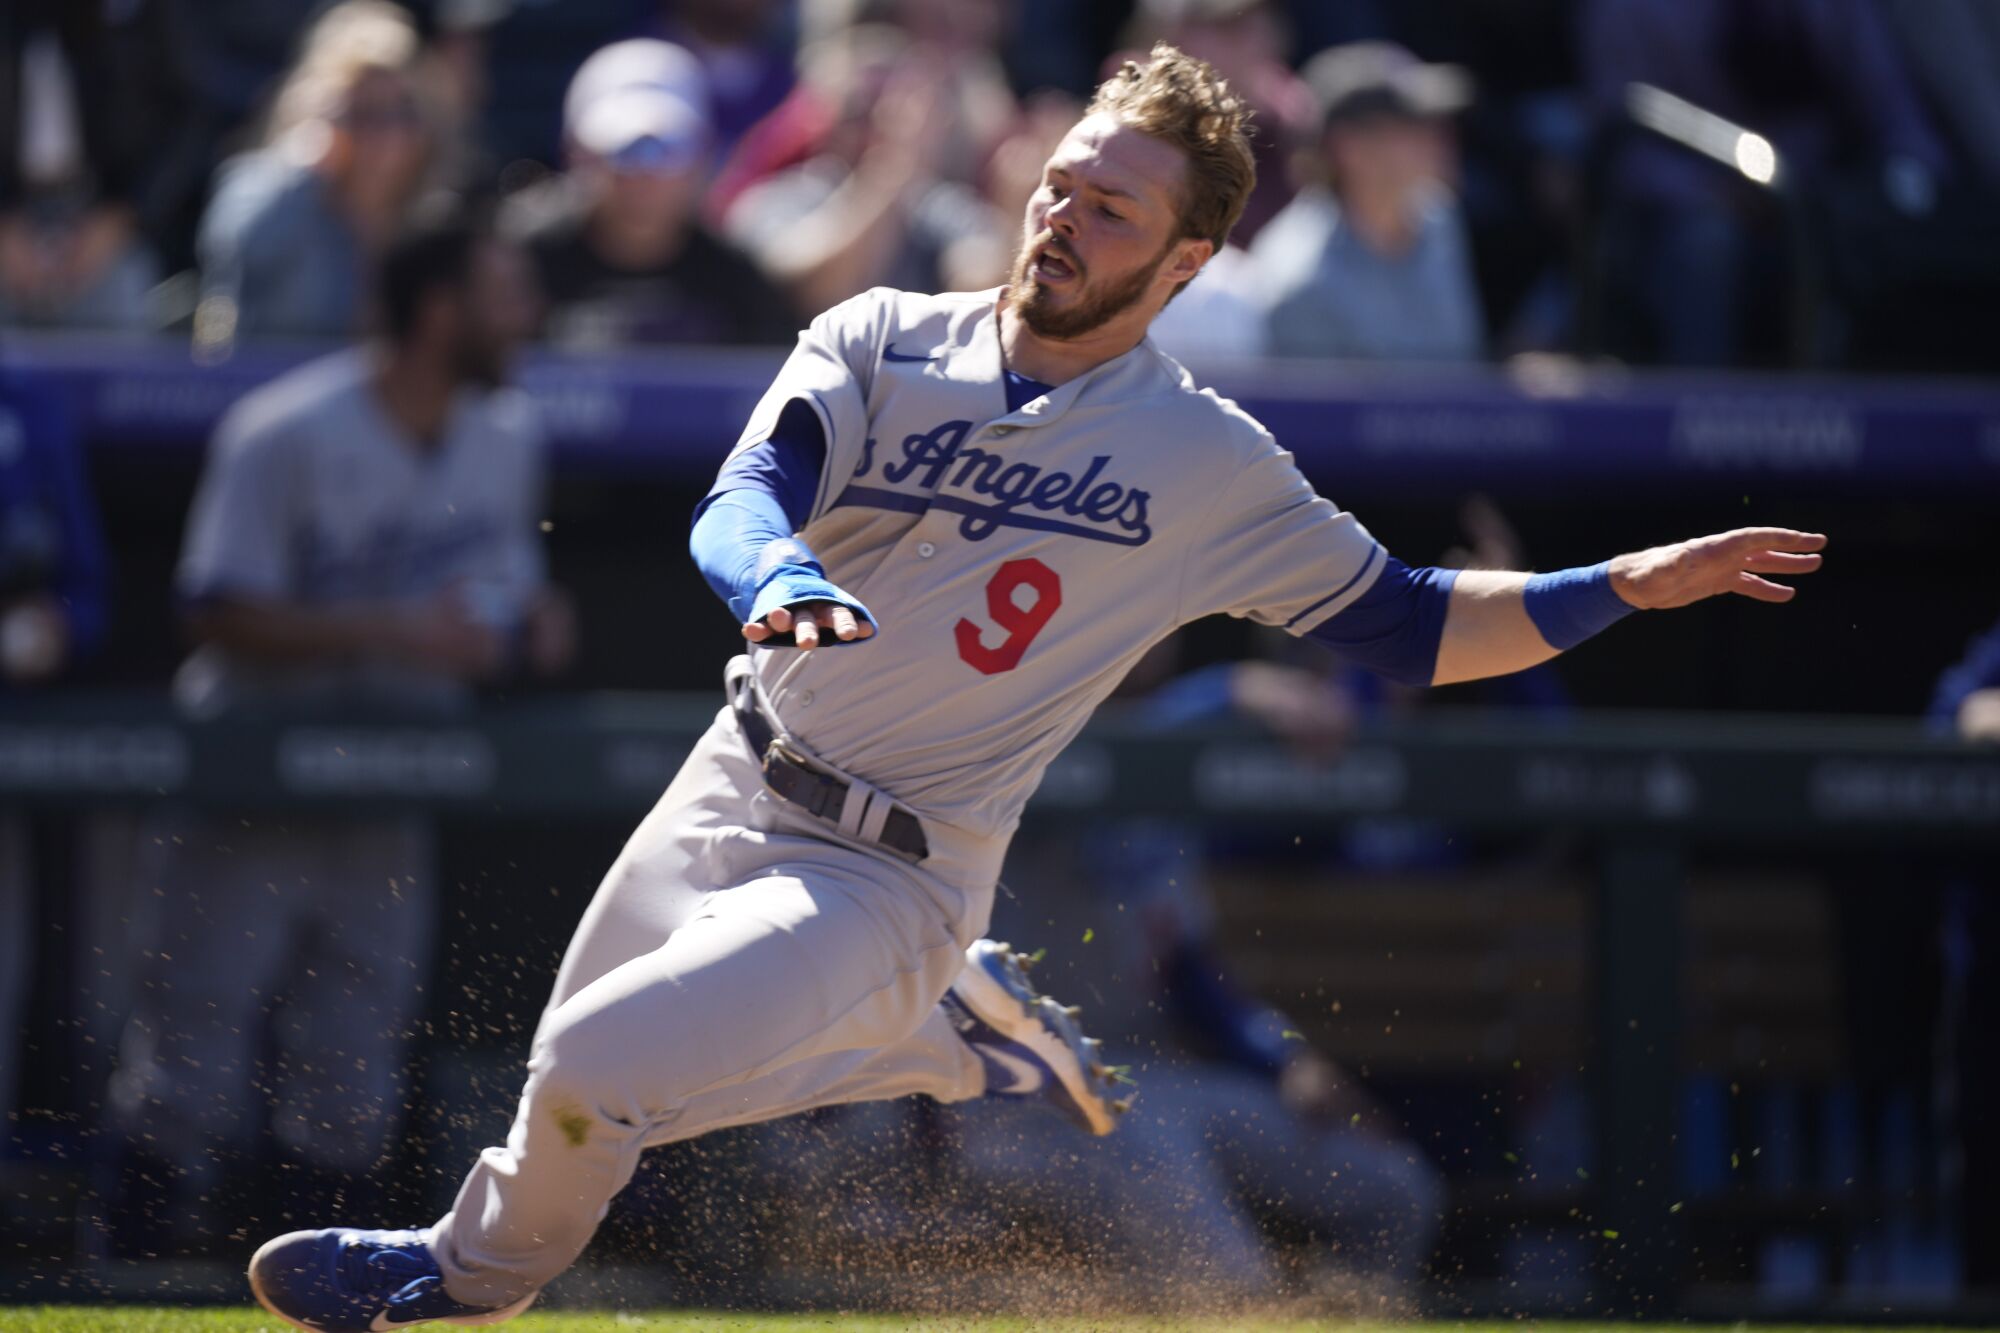 Dodgers second baseman Gavin Lux slides safely into home plate to score.